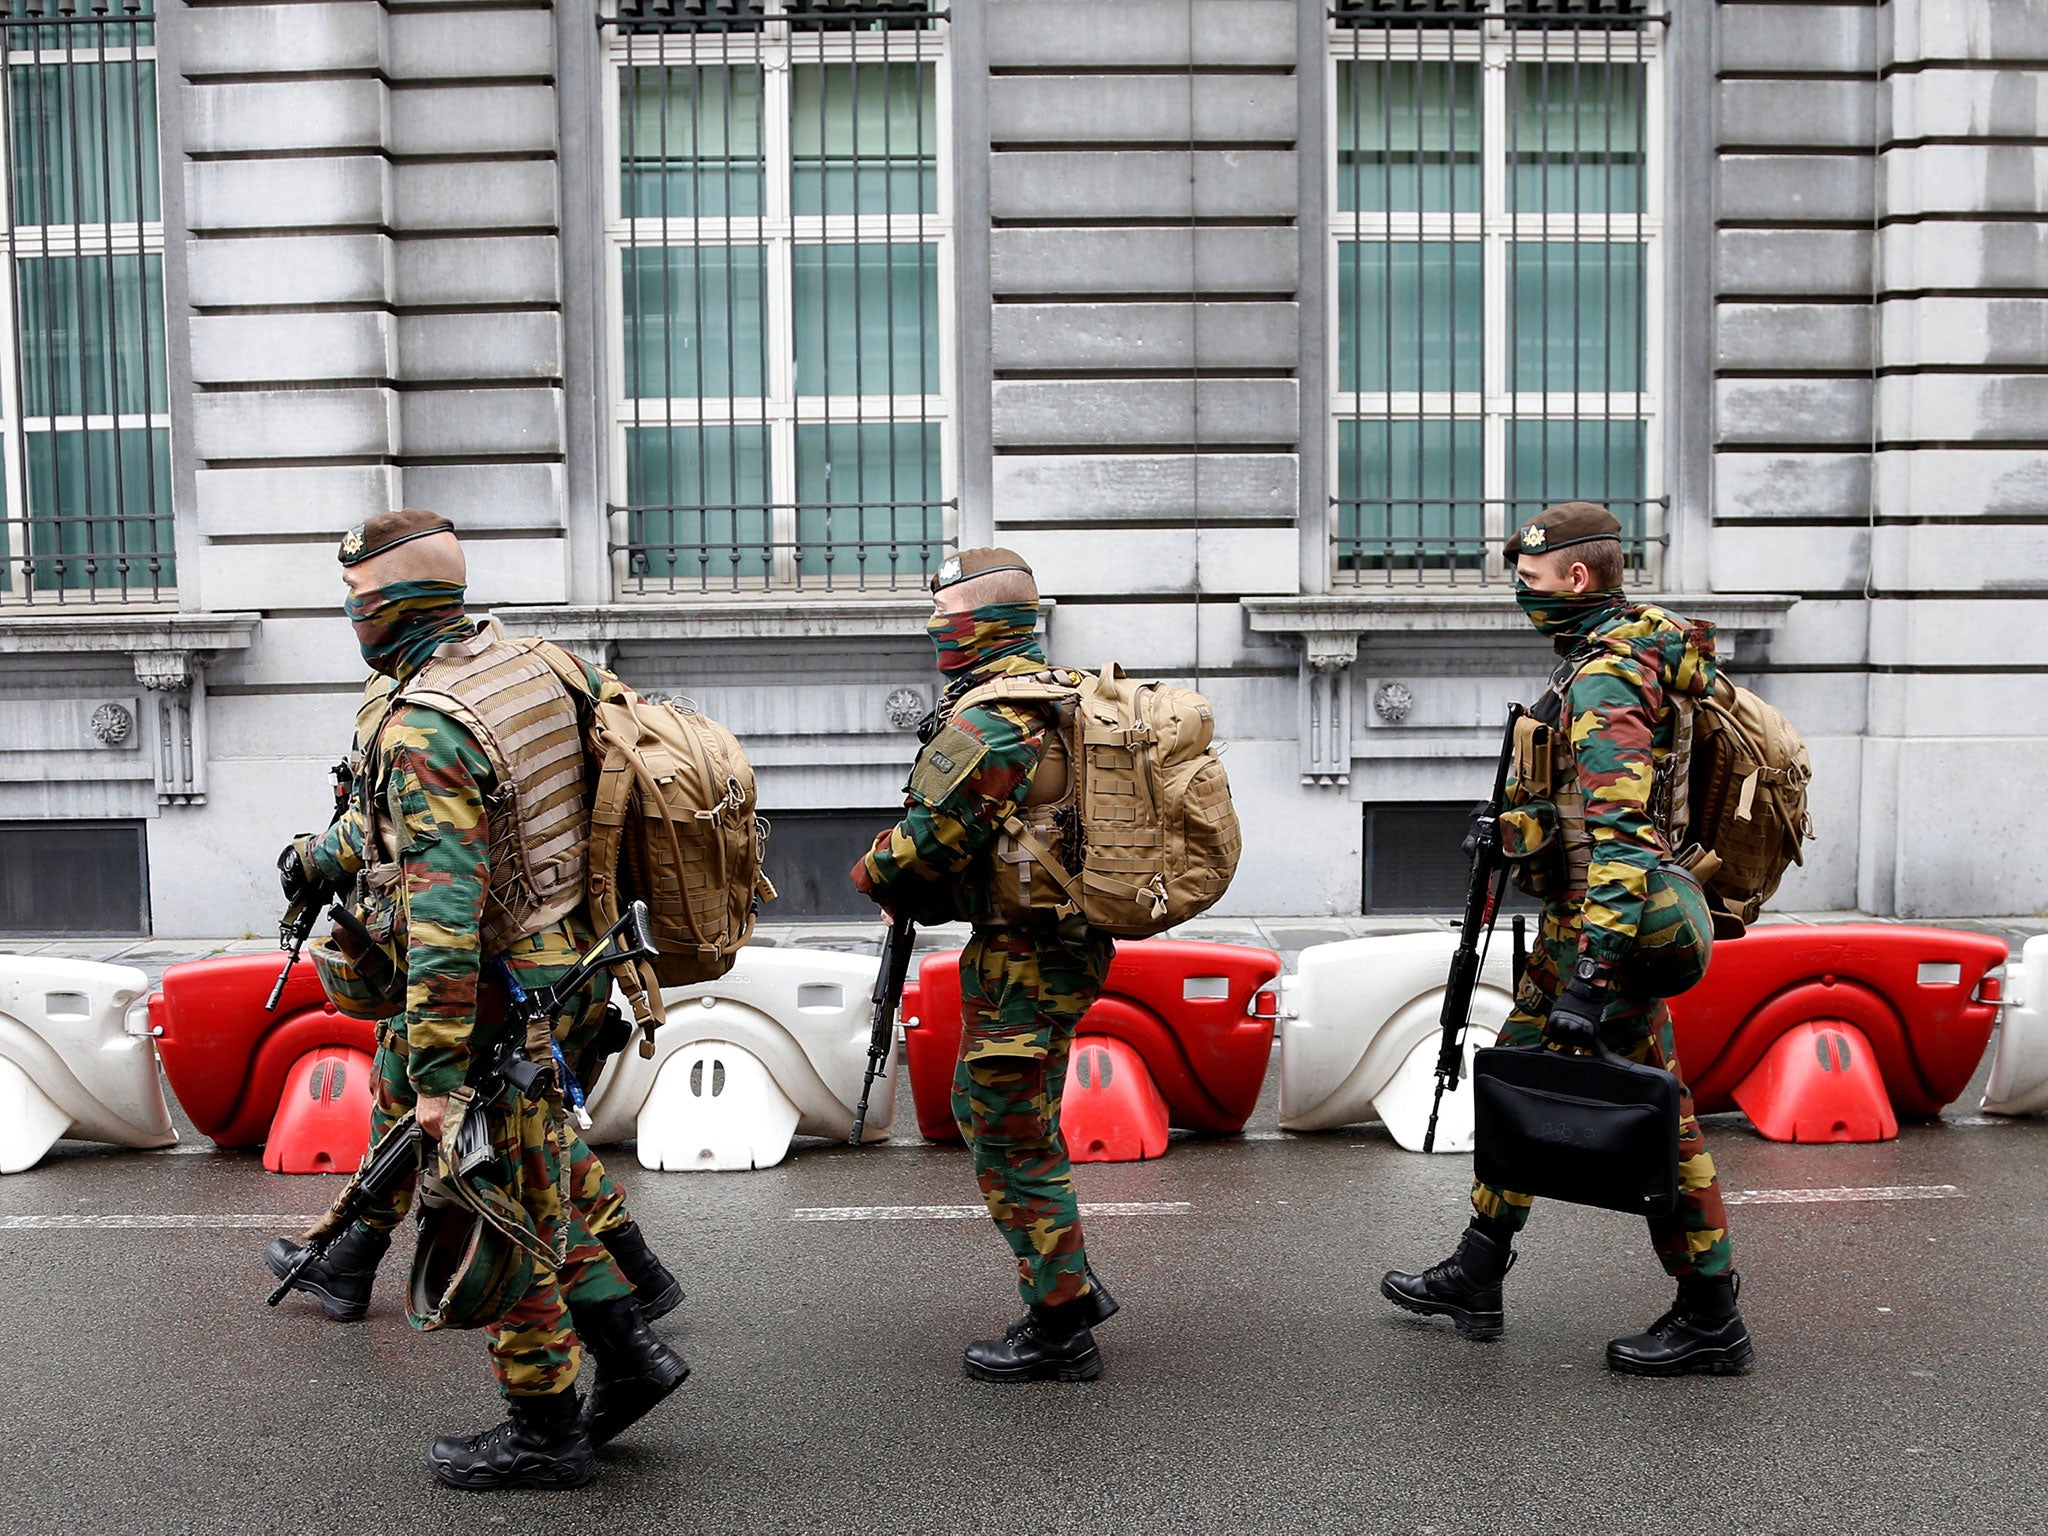 Security remains high in Belgium following the Brussels attacks